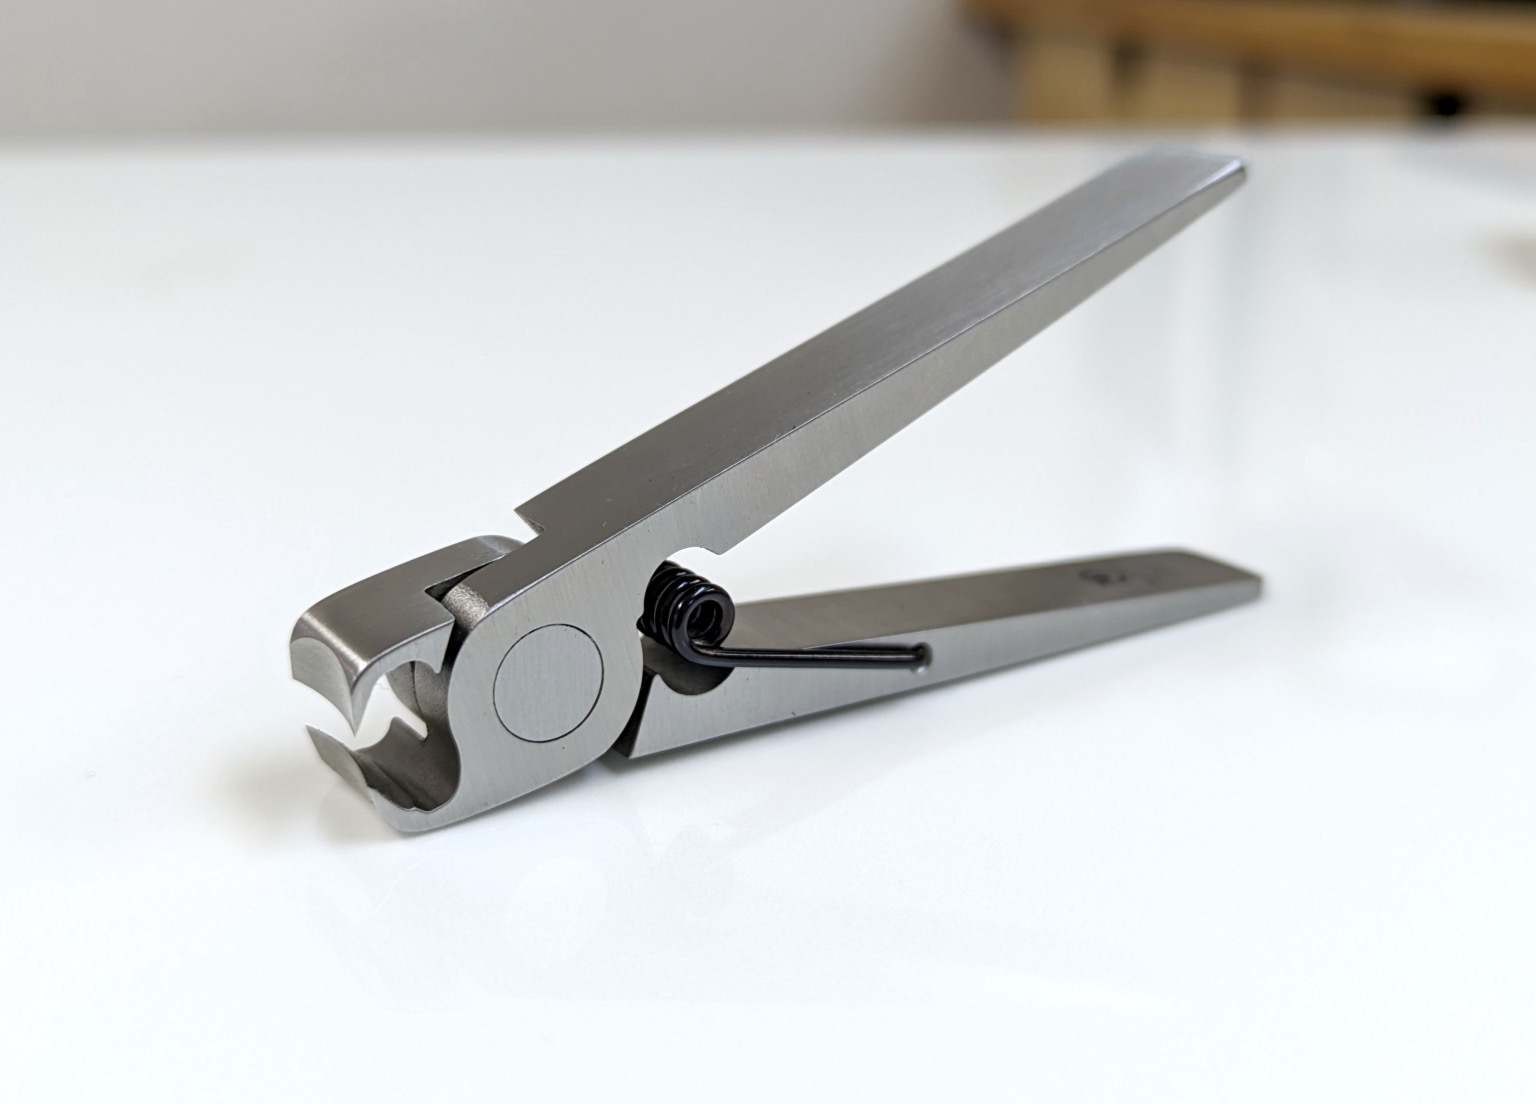 Buy Nail Nipper, Blue Online at Best Price in India